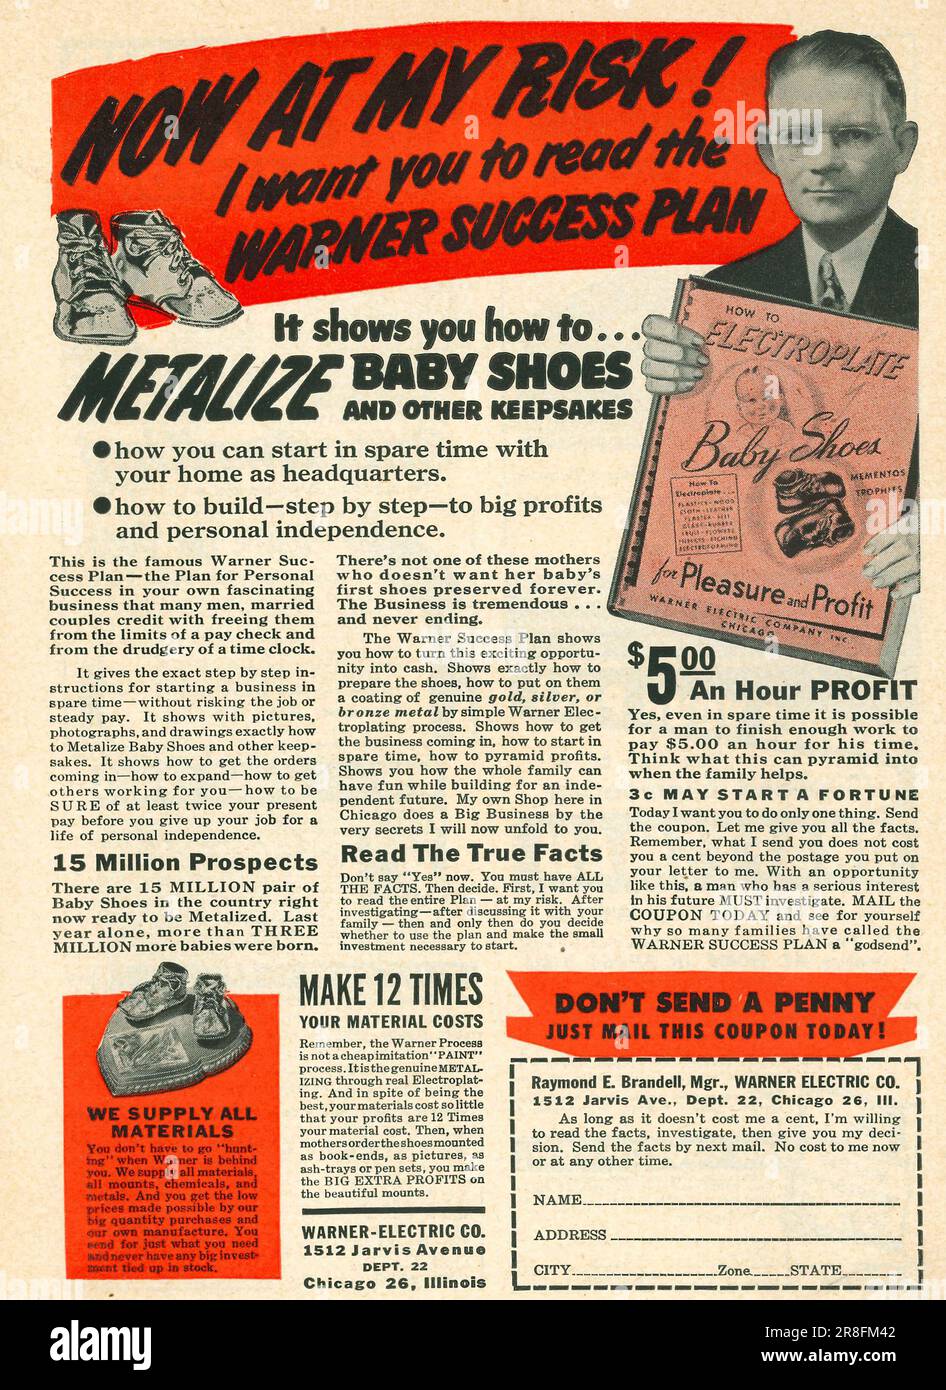 Warner success plan - Metalize baby shoes. - metalizing through electroplating - advert in  magazine, USA, February 1949. Warner-electric Illinois ad Stock Photo